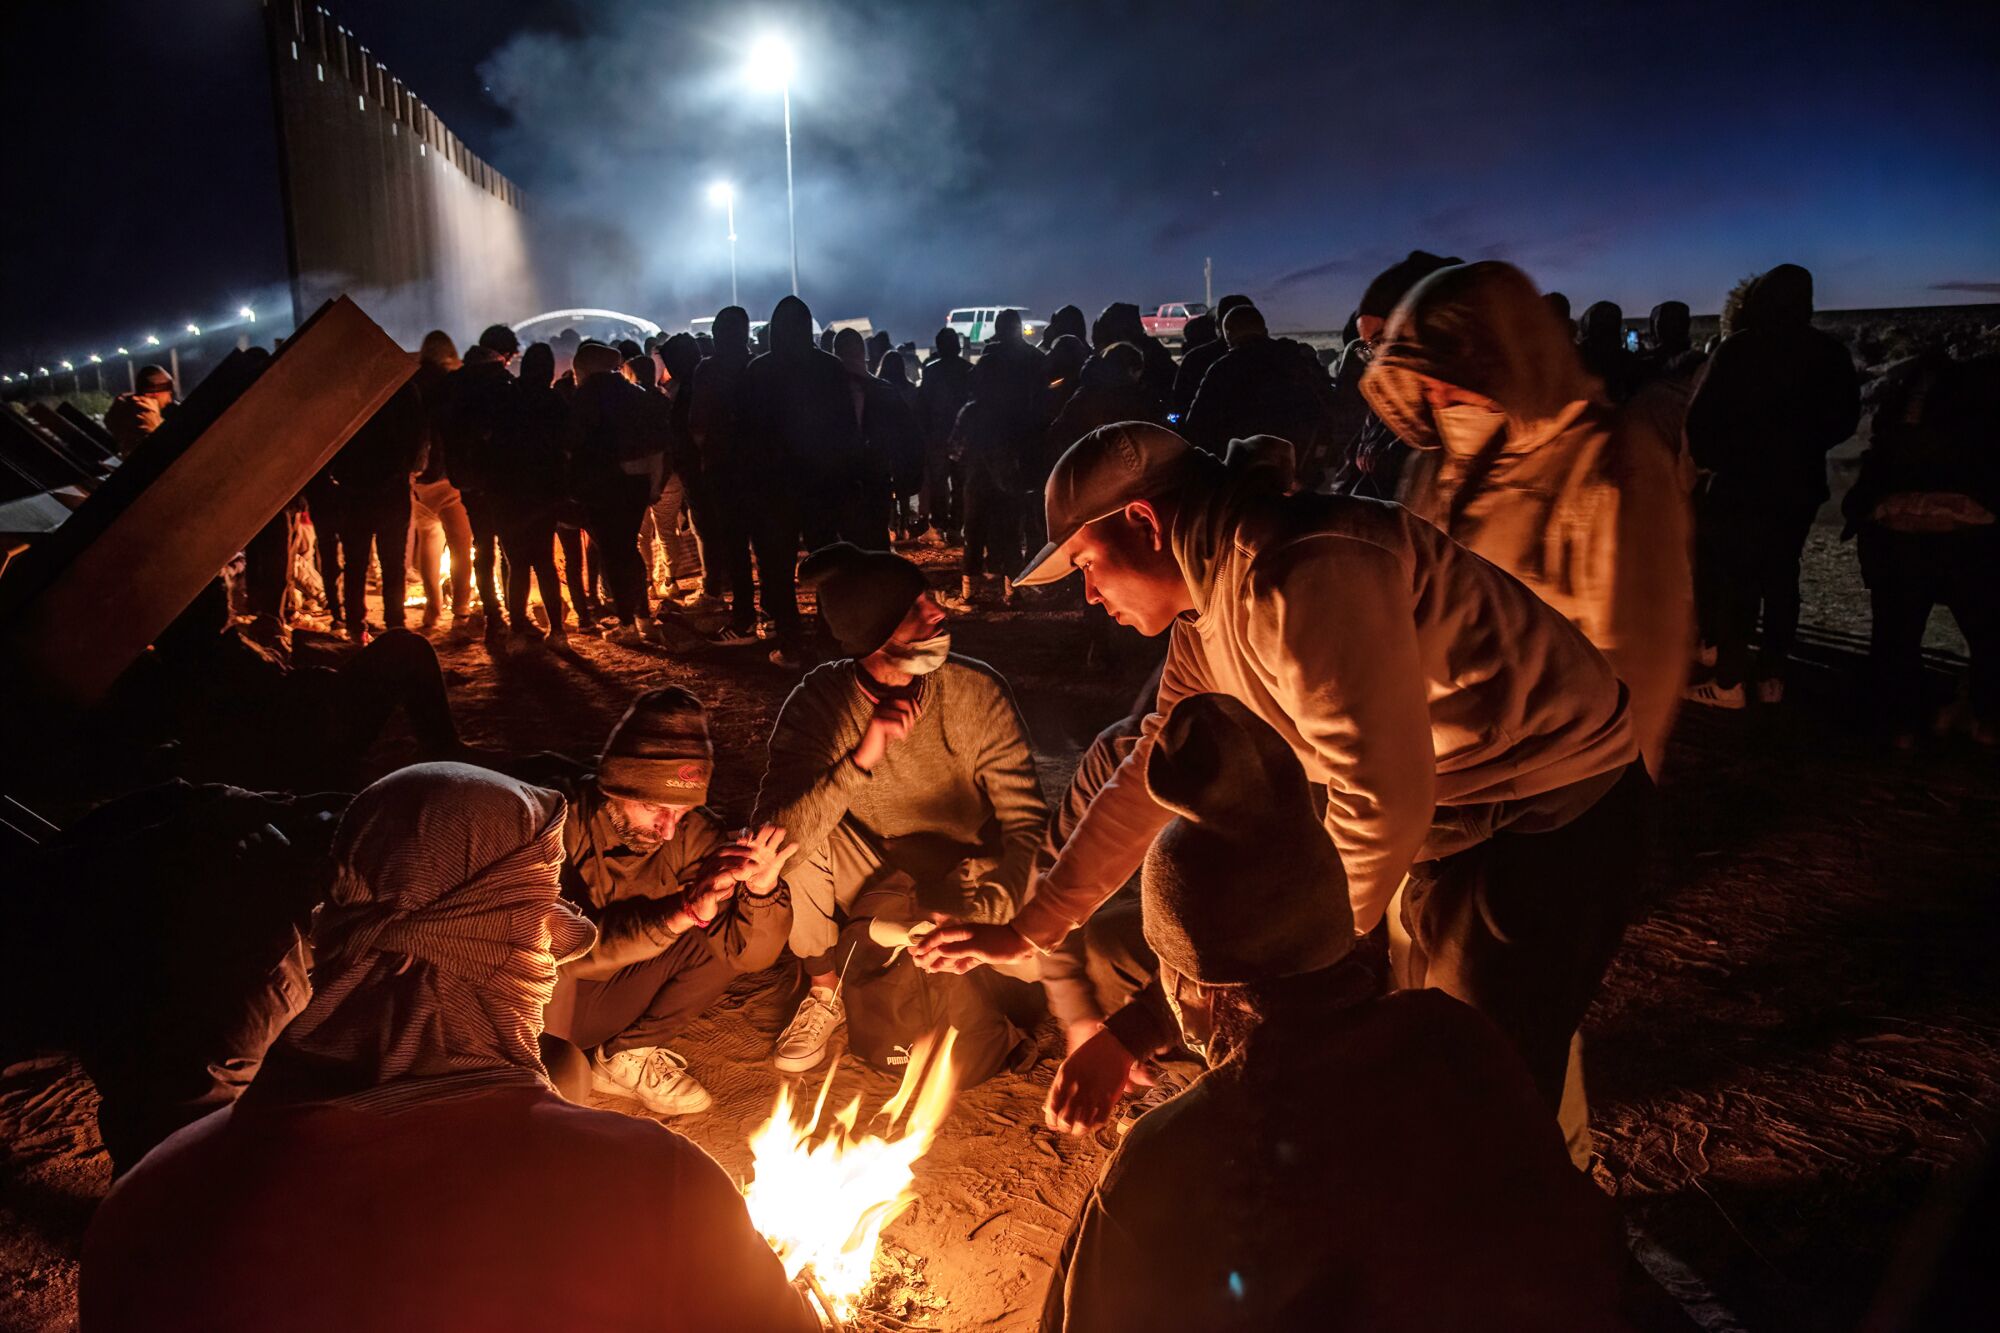 Migrants who crossed the border without authorization in the frigid early morning huddle around makeshift fires.